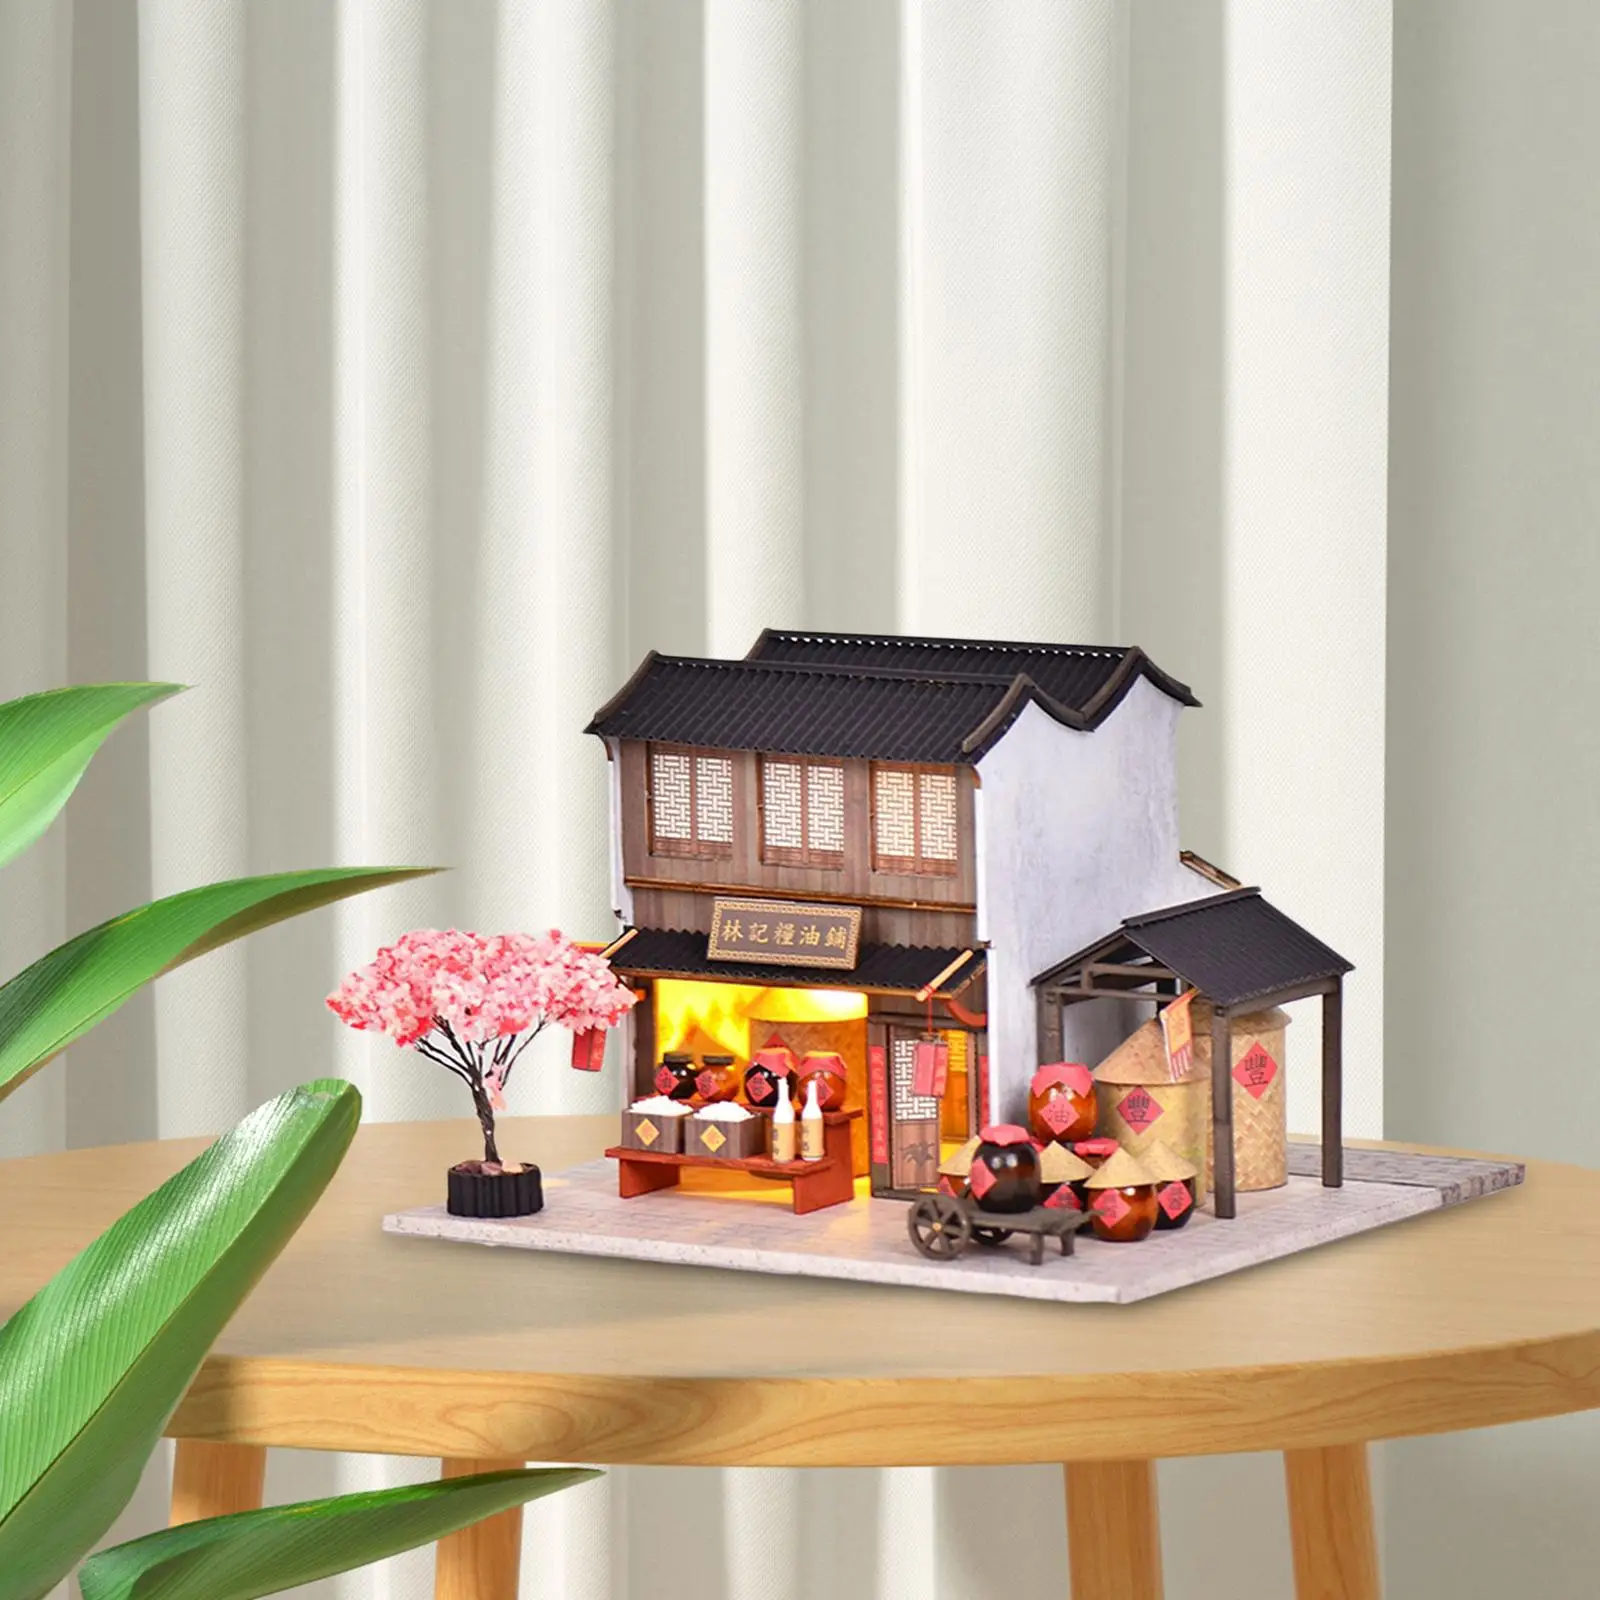 Small House Set Romantic Valentine`S Gift Creative Toys for Friends Adults